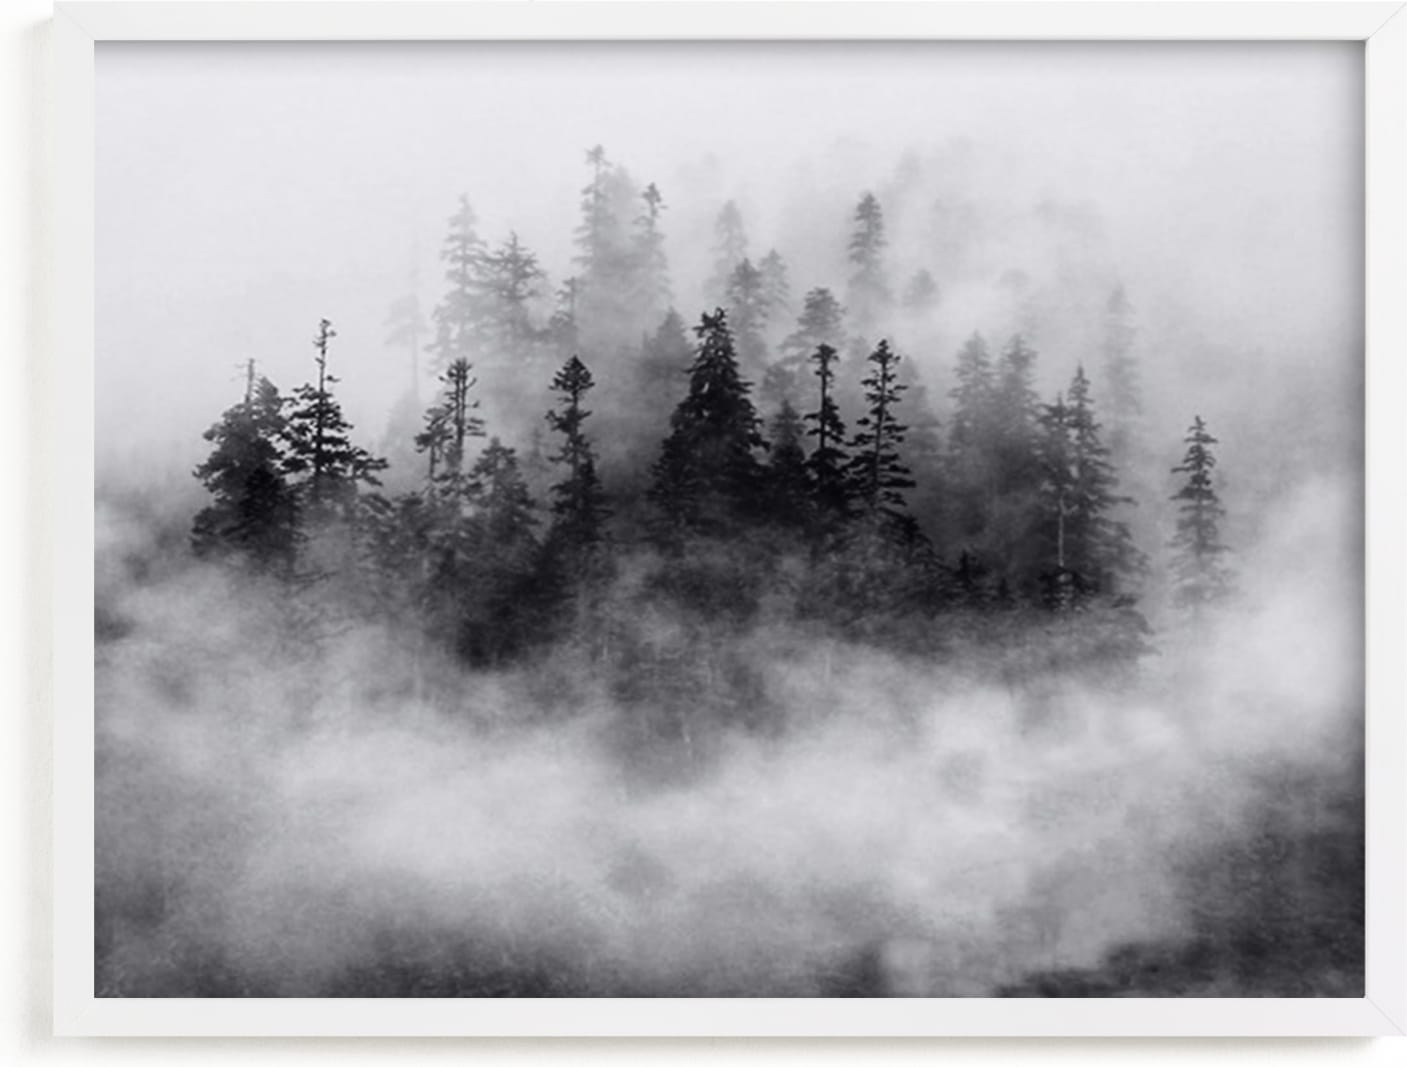 This is a black and white art by A MAZ Design called Lost in the Fog.